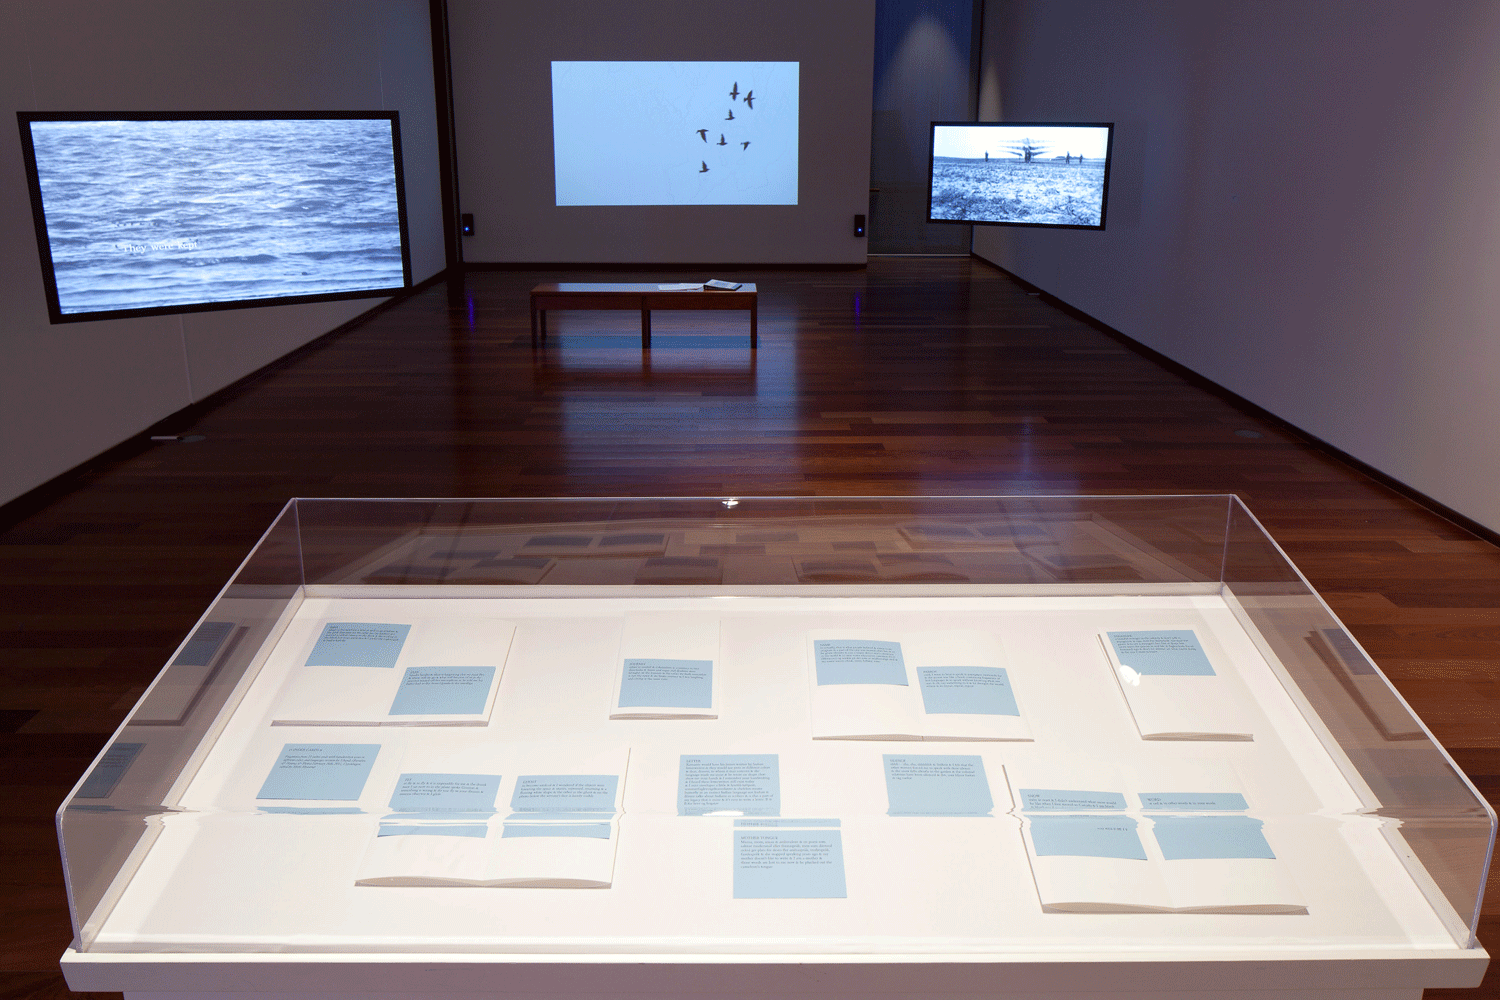 Nanna Debois Buhl and Brendan Fernandes. Installation view, In Your Words, 2014.